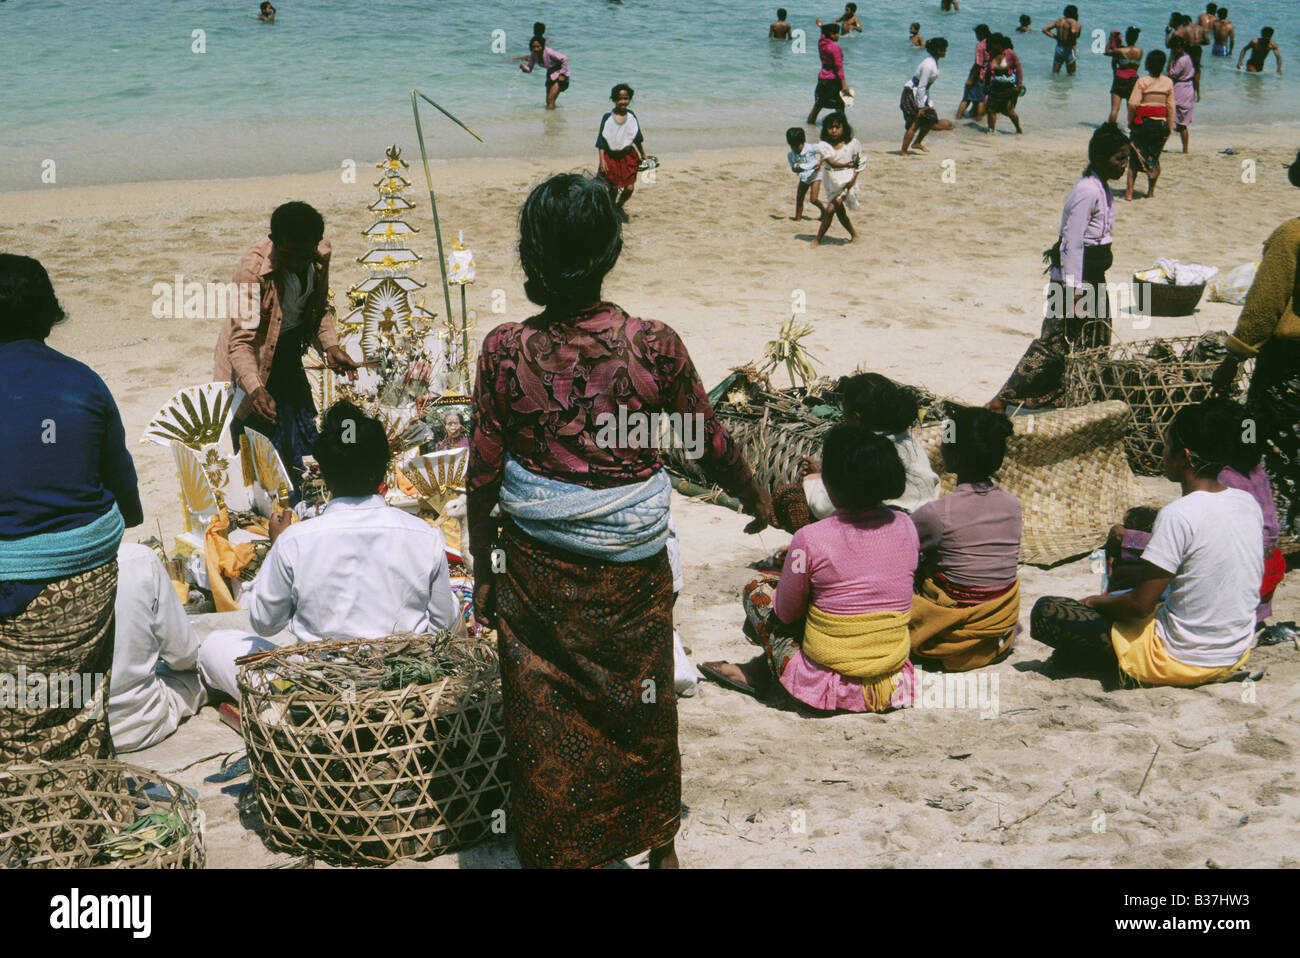 Ceremony held on beach Body in wicker bier People seated on sand Icons ornaments People in sea BEACH FUNERAL BALI INDONESIA Stock Photo